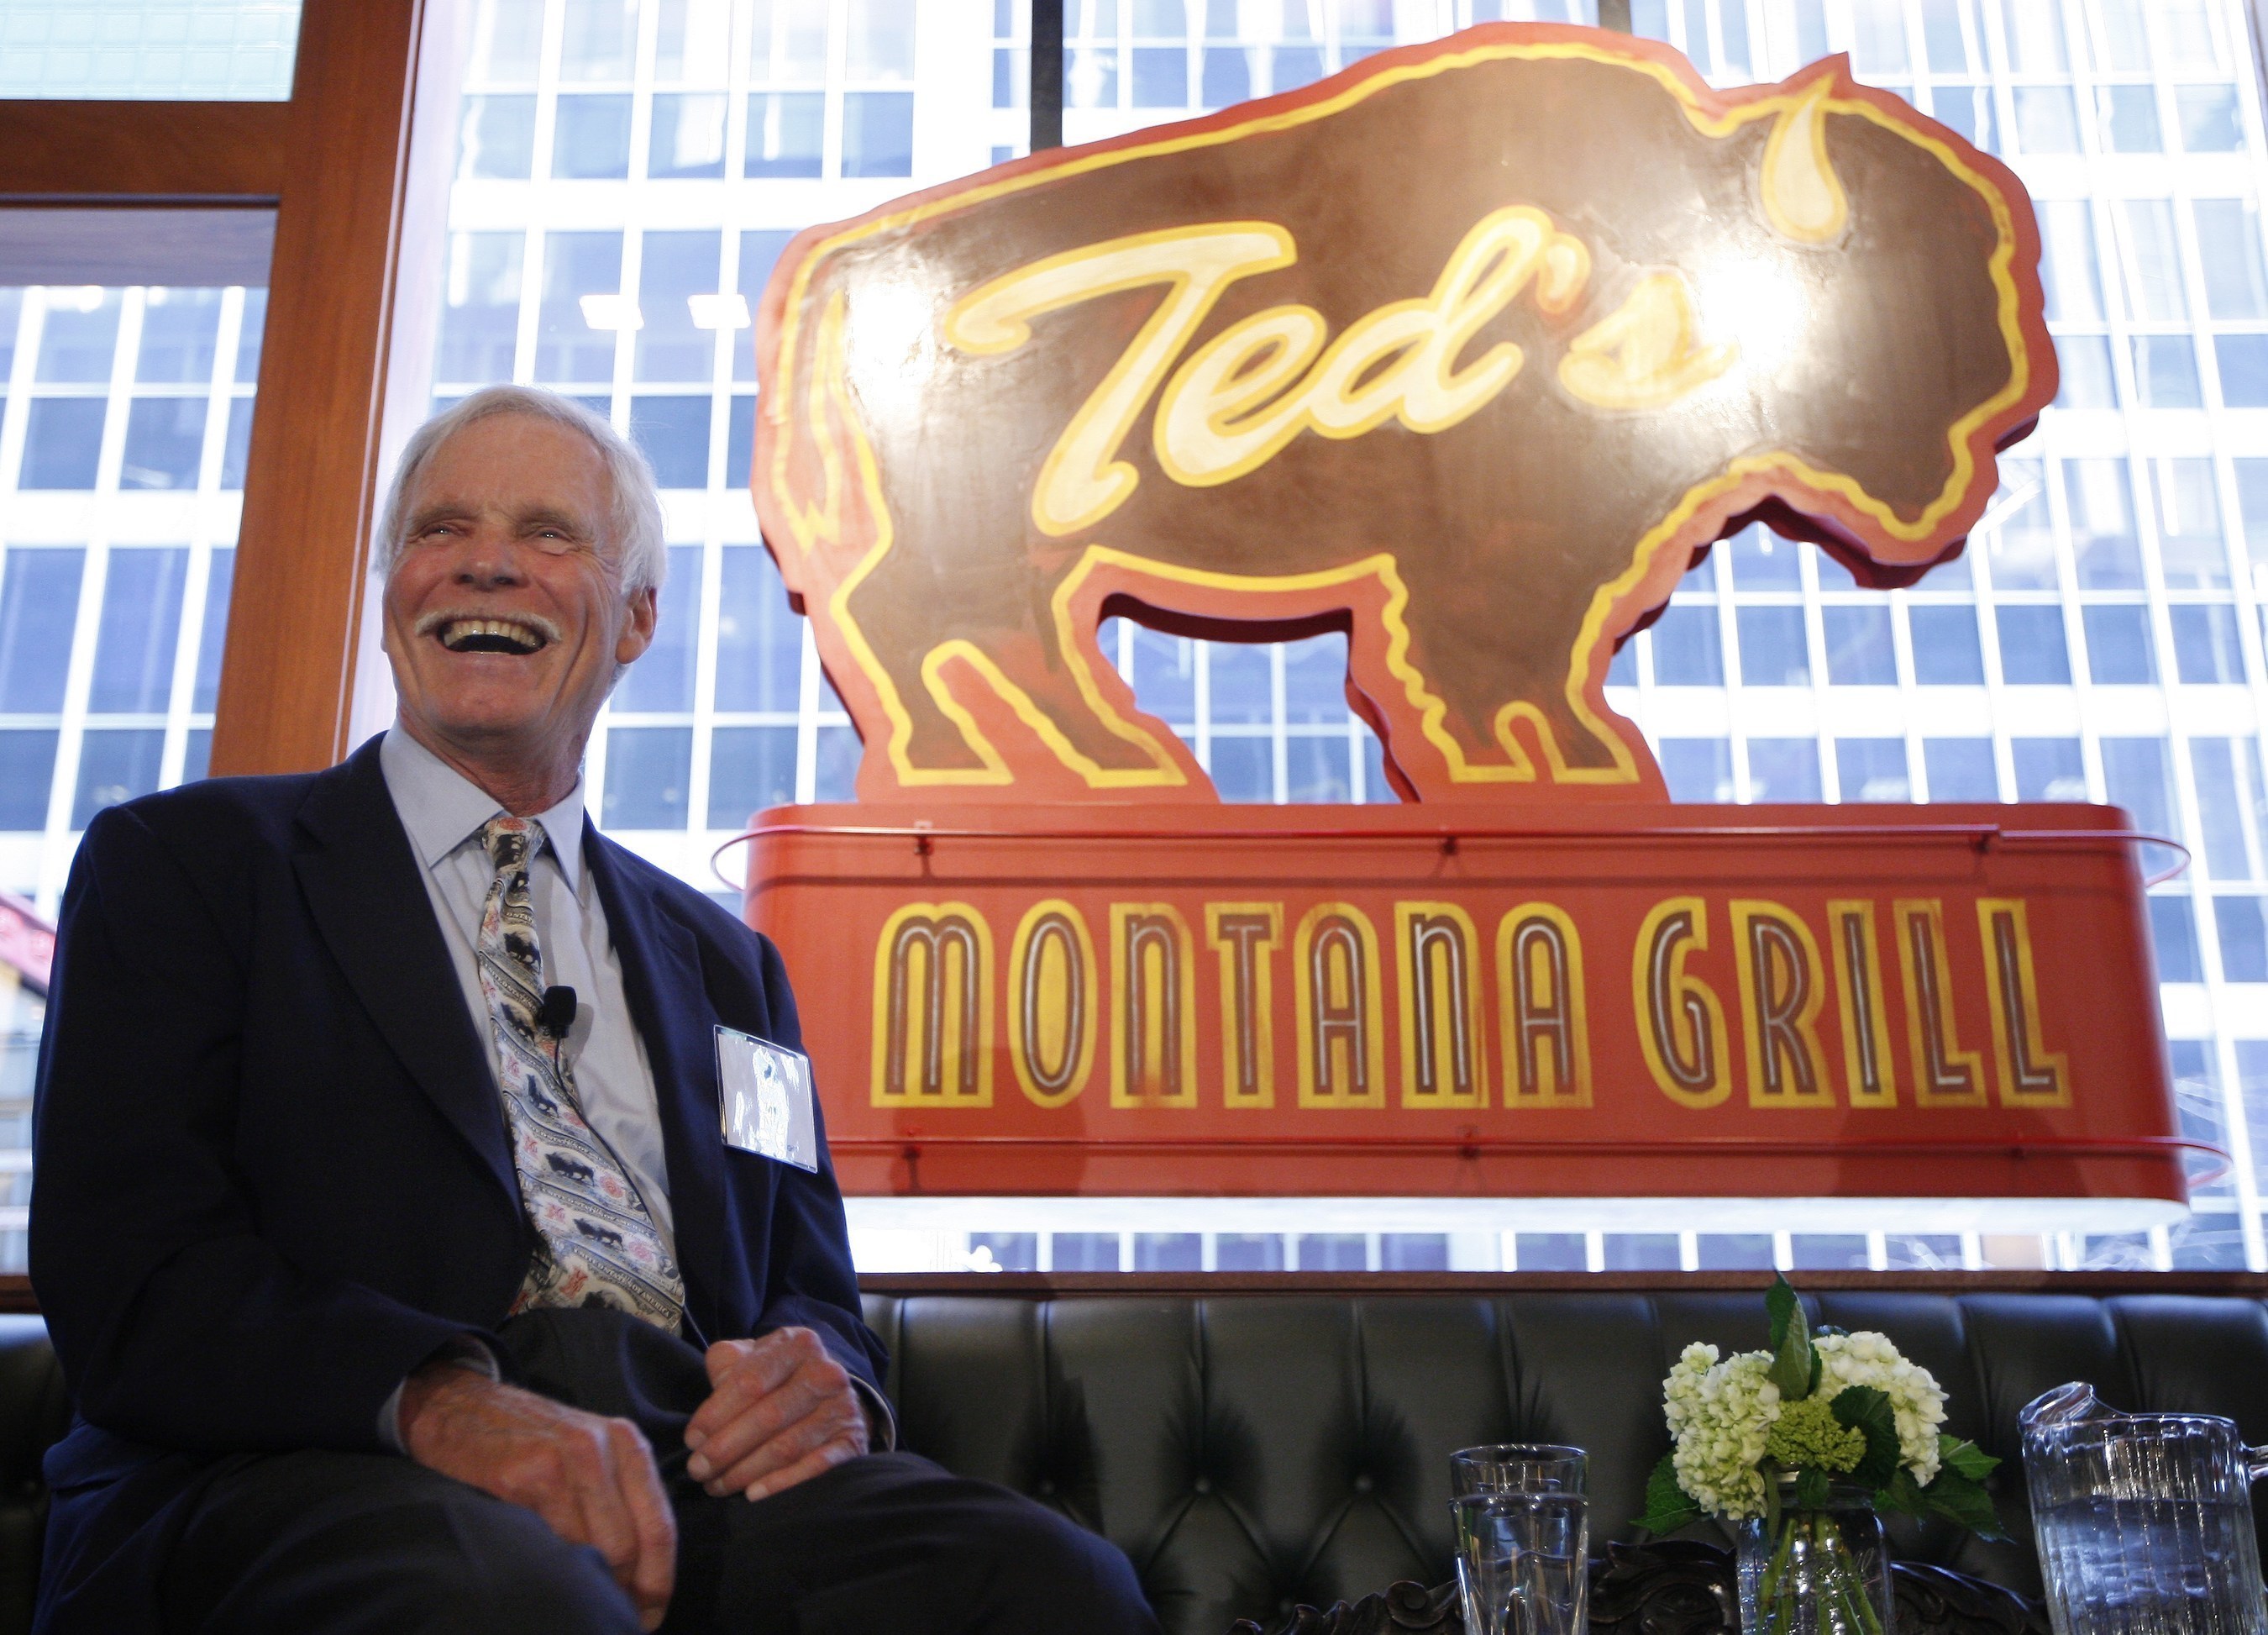 Ted Turner, co-founder of Ted's Montana Grill